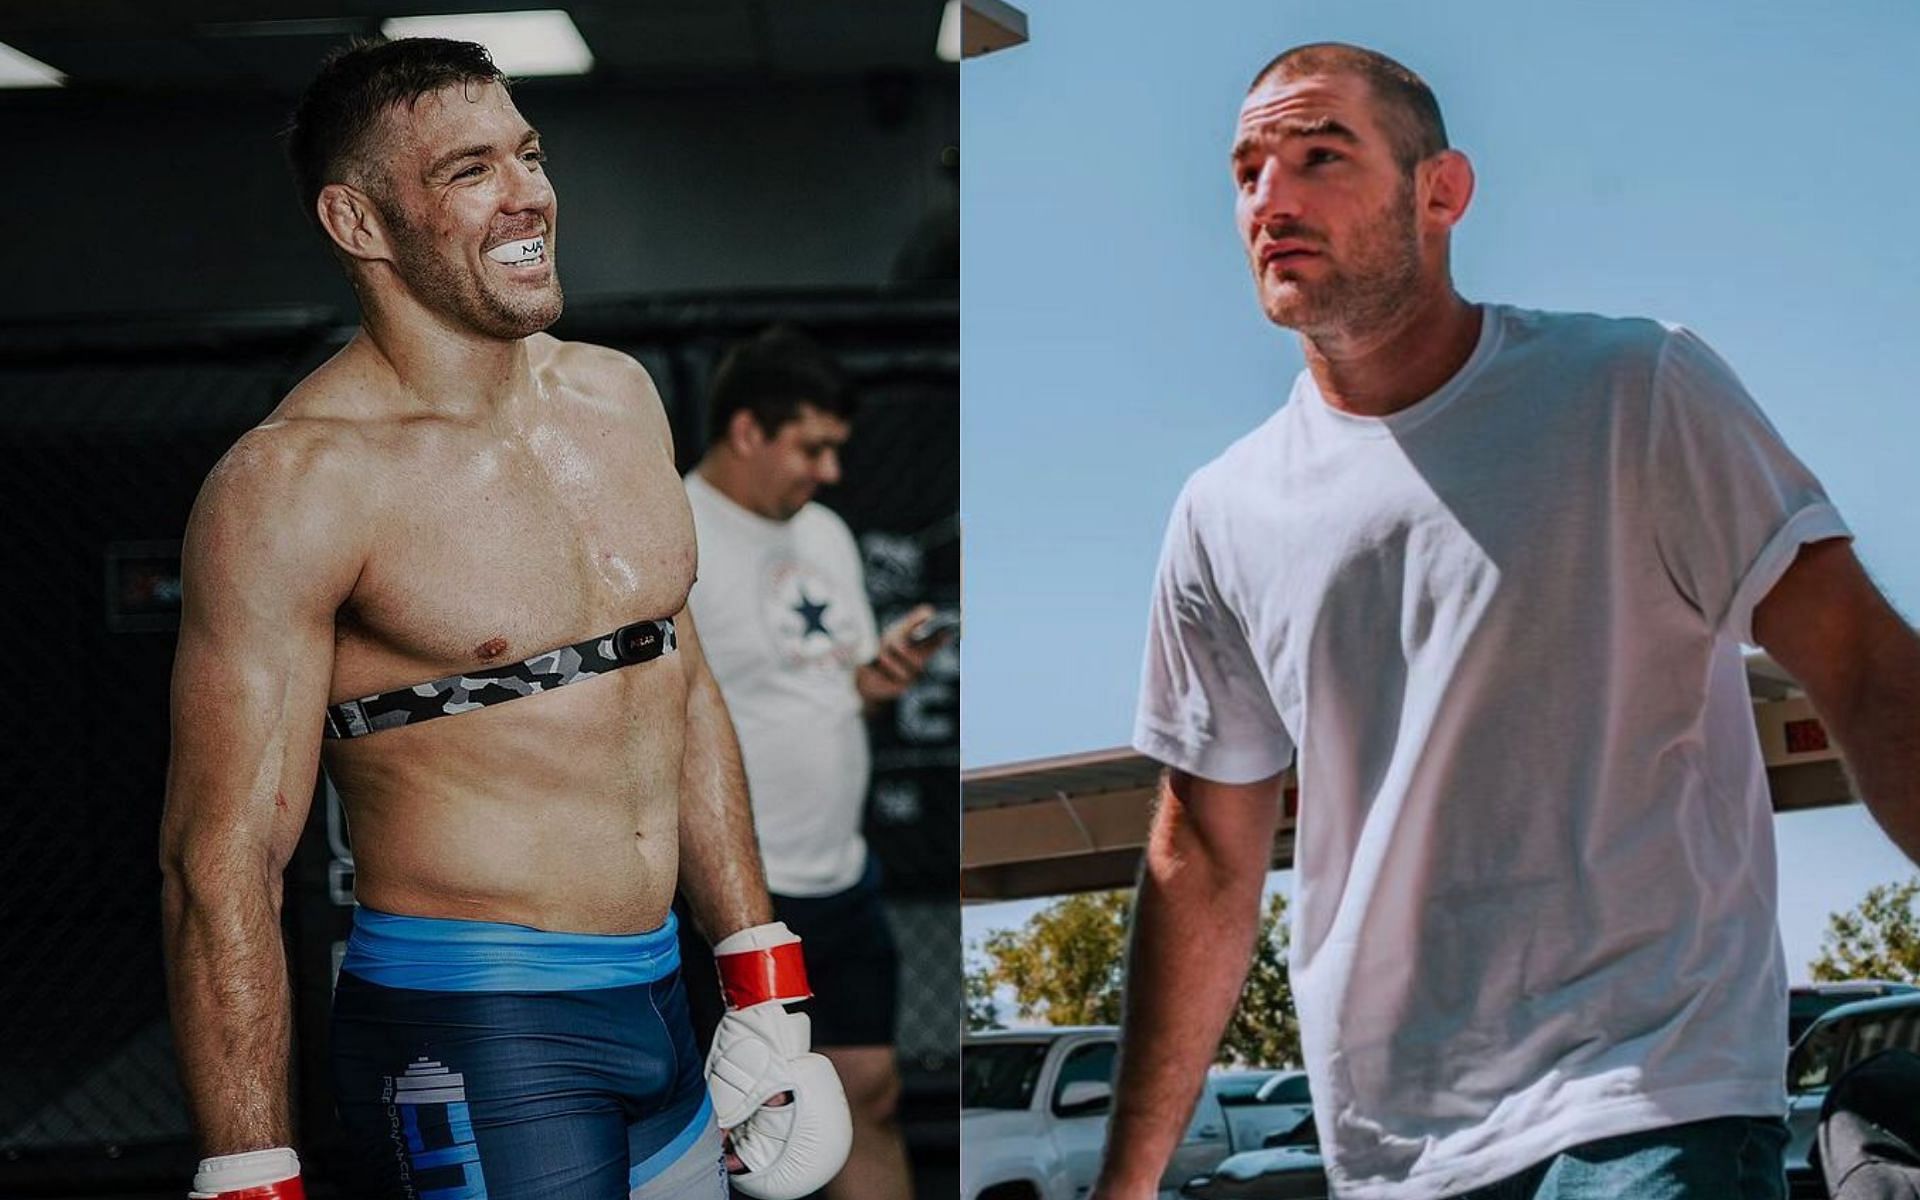 Sean Strickland (right) tried to bite Dricus du Plessis (left) during UFC 296 melee [Images courtesy @stricklandmma @dricusduplessis on Instagram]